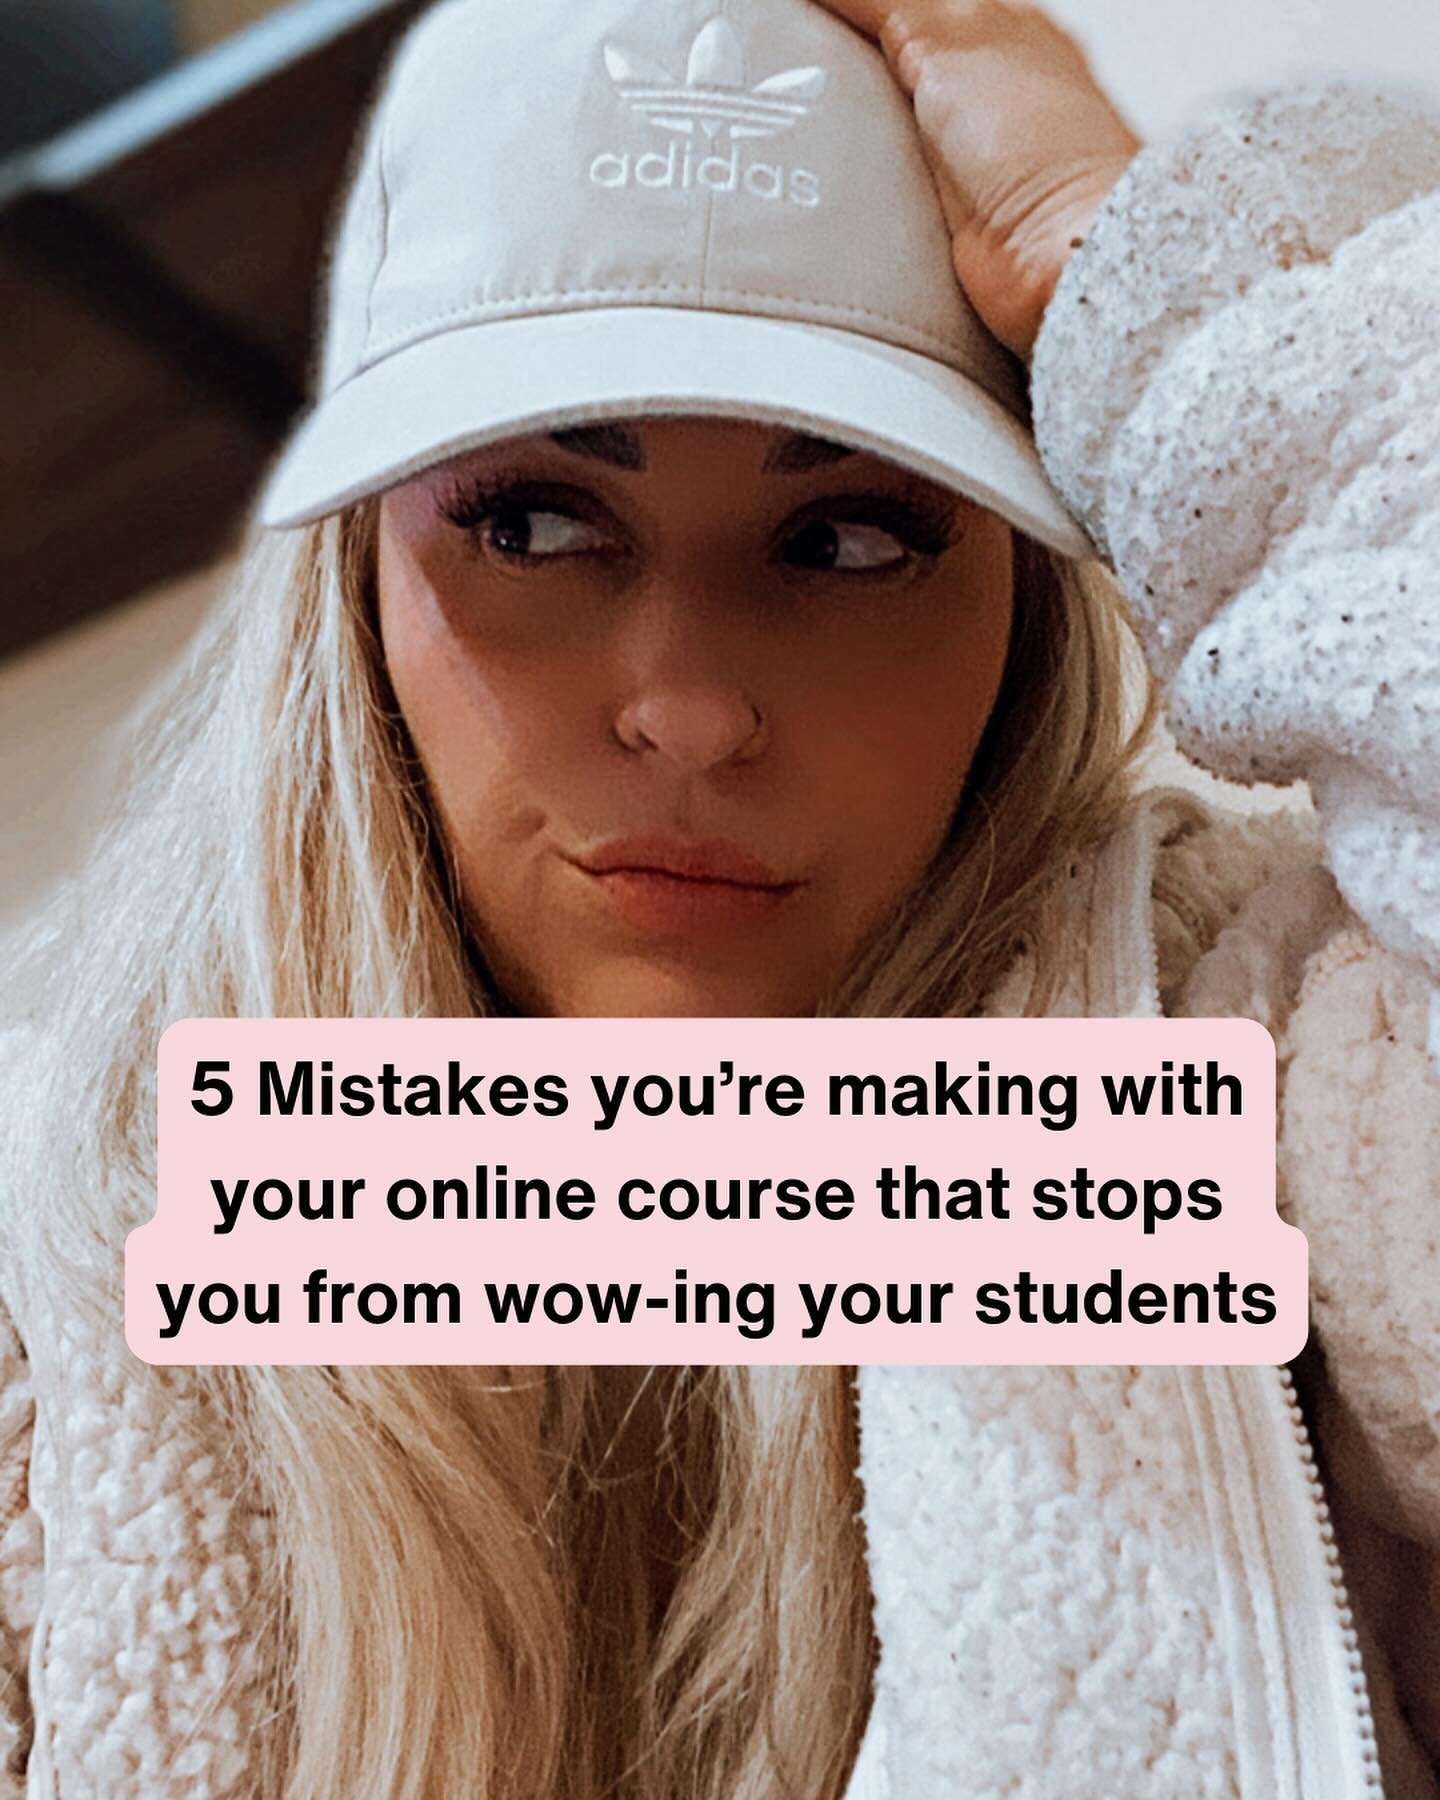 Are you making these mistakes with your online course?

Join the VIP list for the solution to creating an online course that stands out and delivers incredible results.

Drop &ldquo; RYC&rdquo; in the comments and I&rsquo;ll show you a DM for the lin